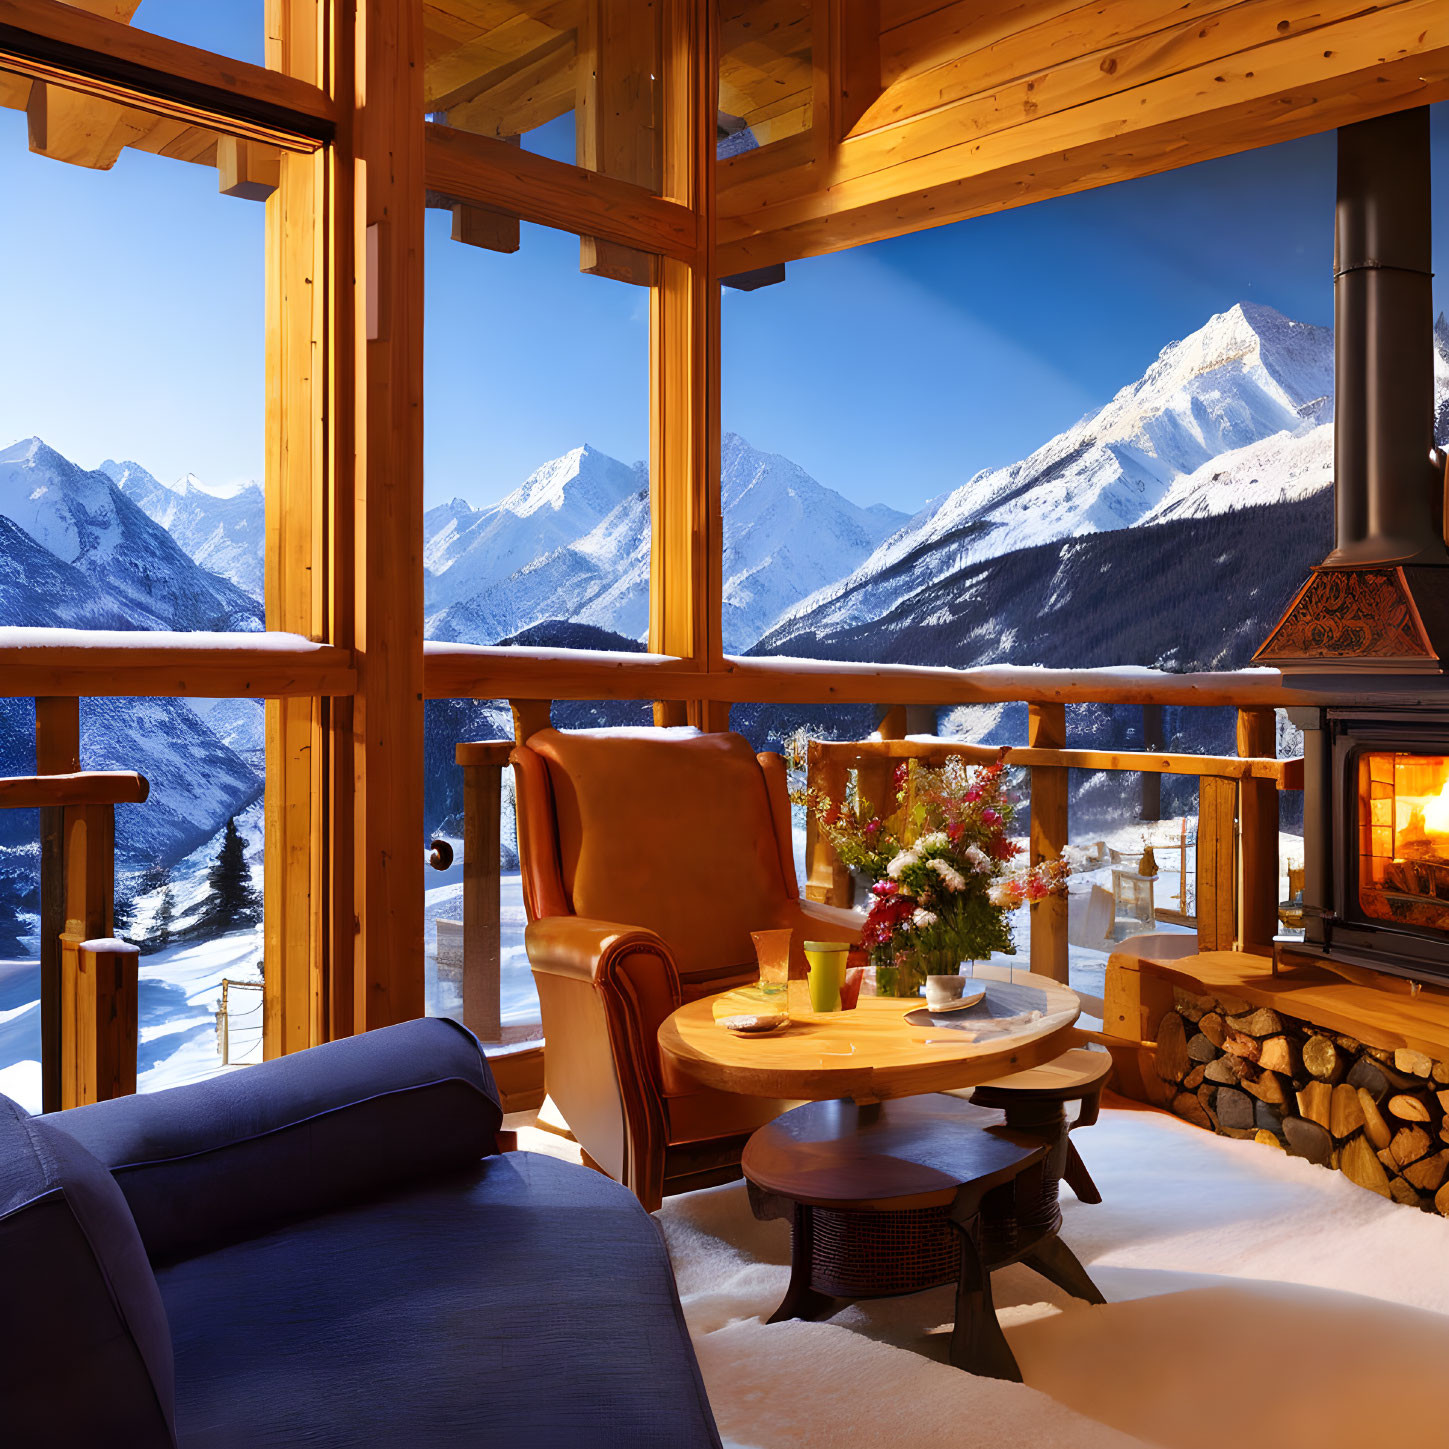 Rustic cabin interior with fireplace, armchair, and snowy mountain view